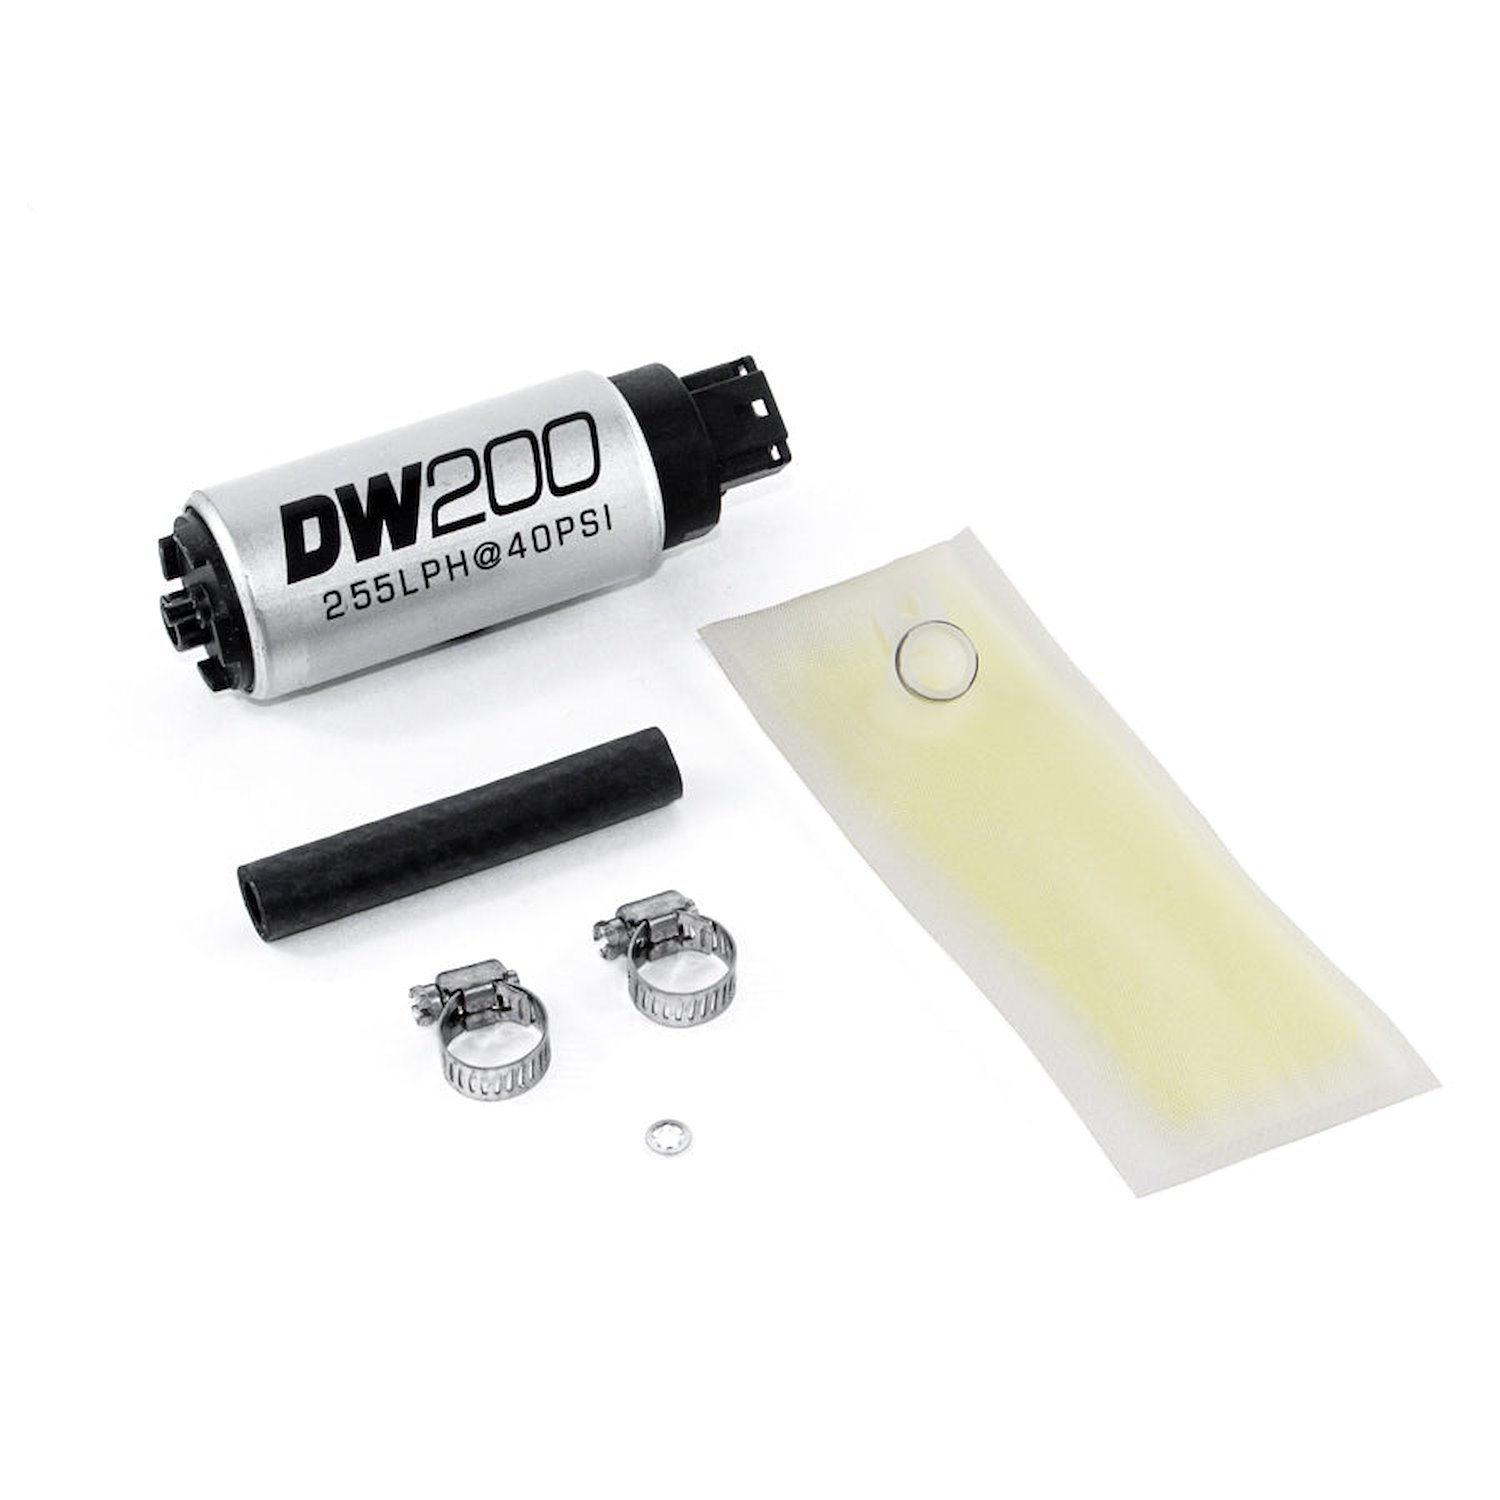 92010846 DW200 series 255lph in-tank fuel pump w/ install kit for Integra 94-01 and Civic 92-00